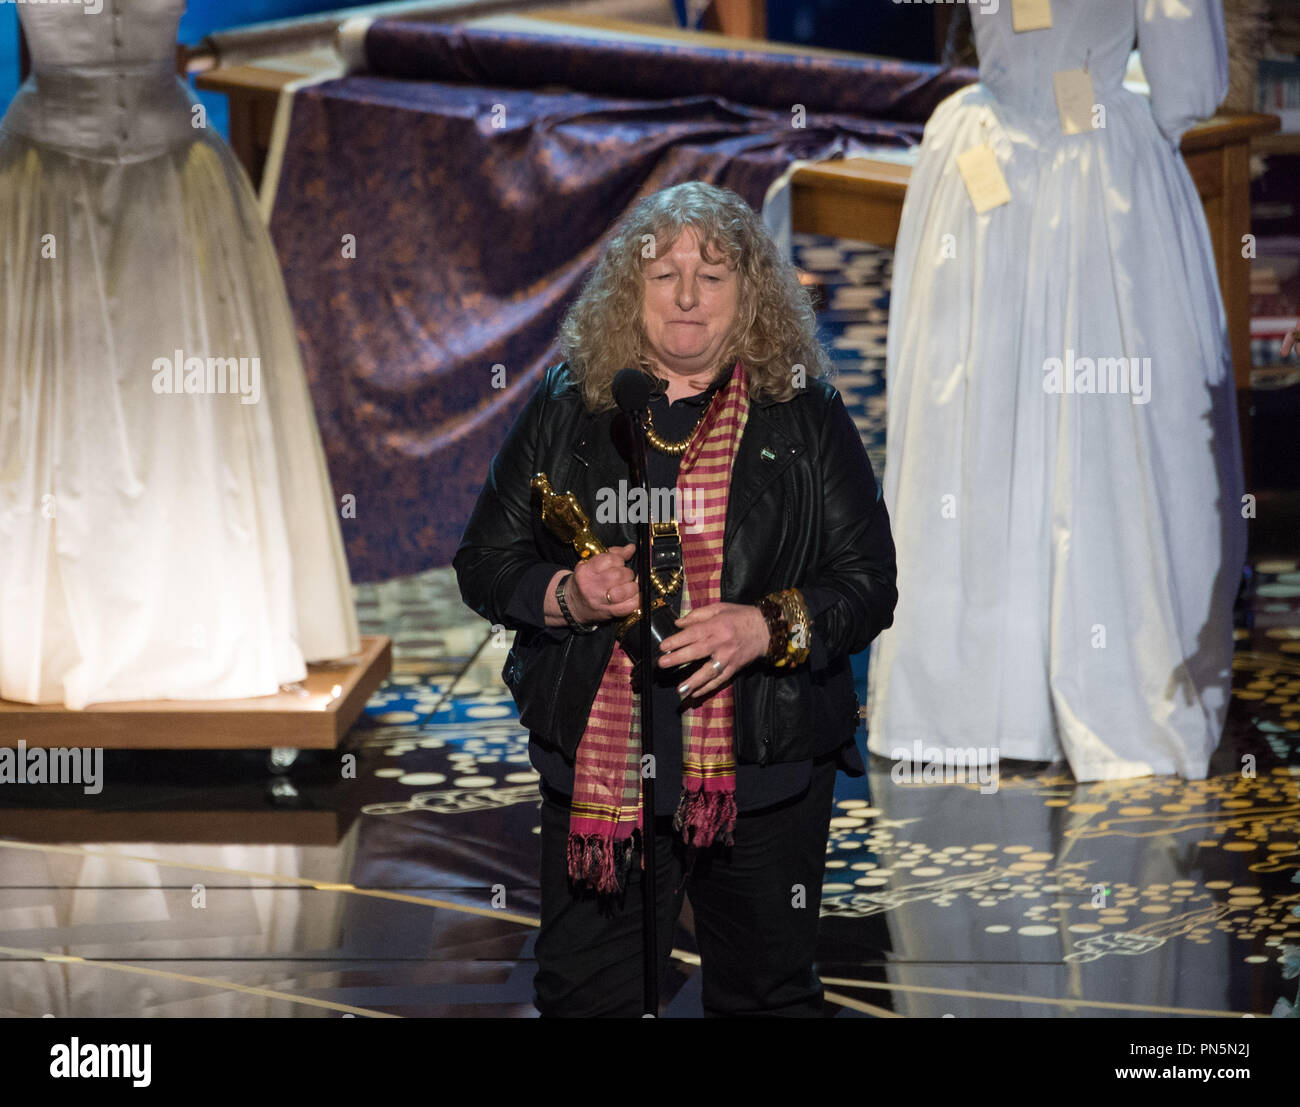 Jenny Beavan accepts the Oscar® for Achievement in costume design, for work on “Mad Max: Fury Road” during the live ABC Telecast of The 88th Oscars® at the Dolby® Theatre in Hollywood, CA on Sunday, February 28, 2016.  File Reference # 32854 502THA  For Editorial Use Only -  All Rights Reserved Stock Photo